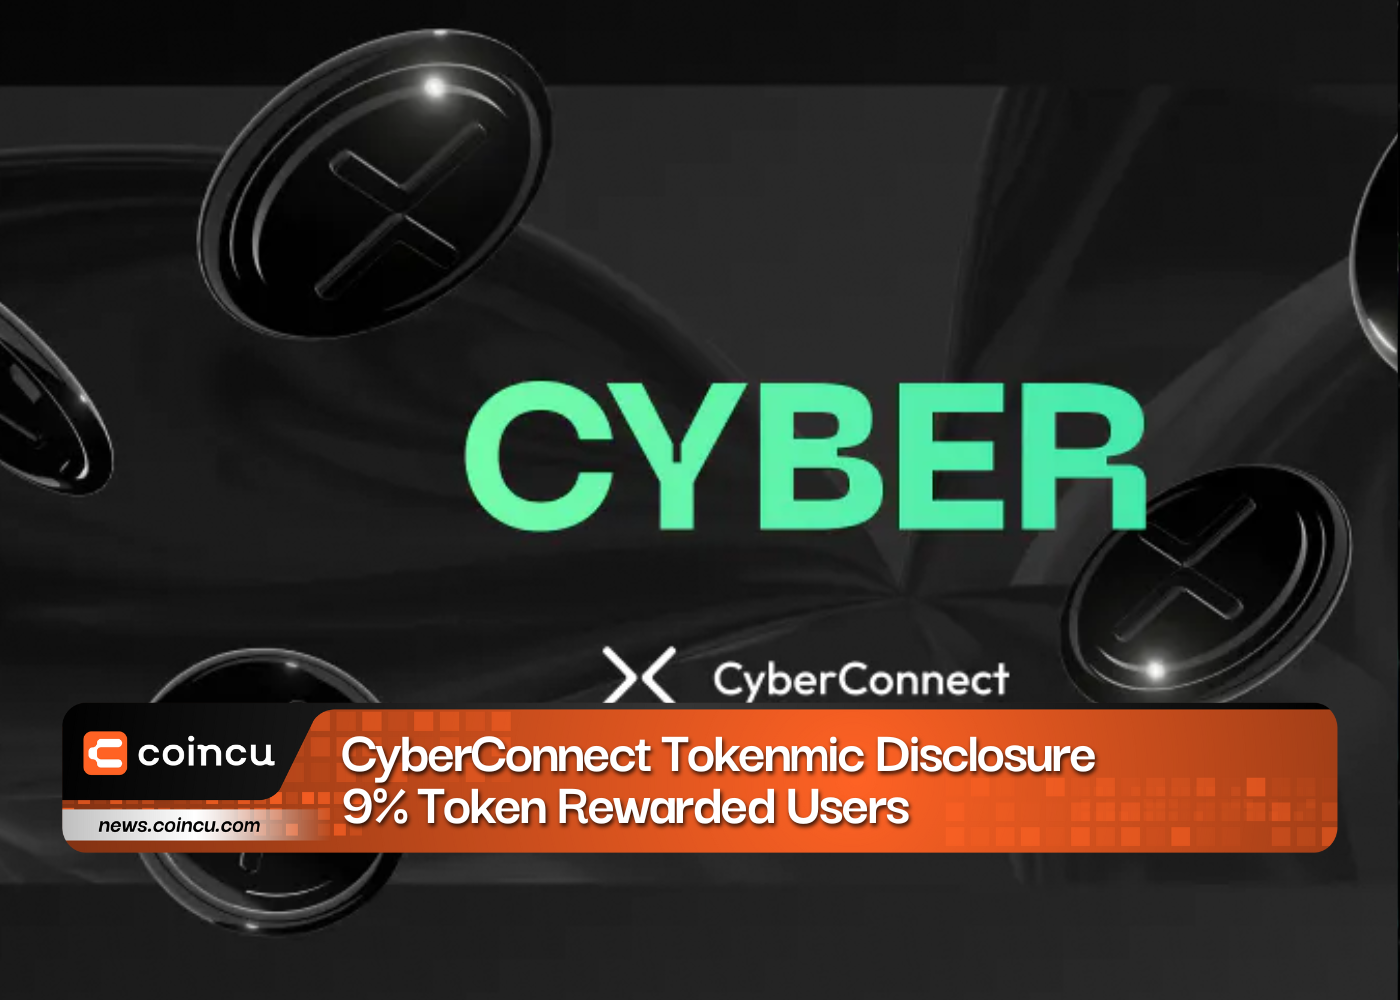 CyberConnect Tokenmic Disclosure, 9% Token Rewarded Users